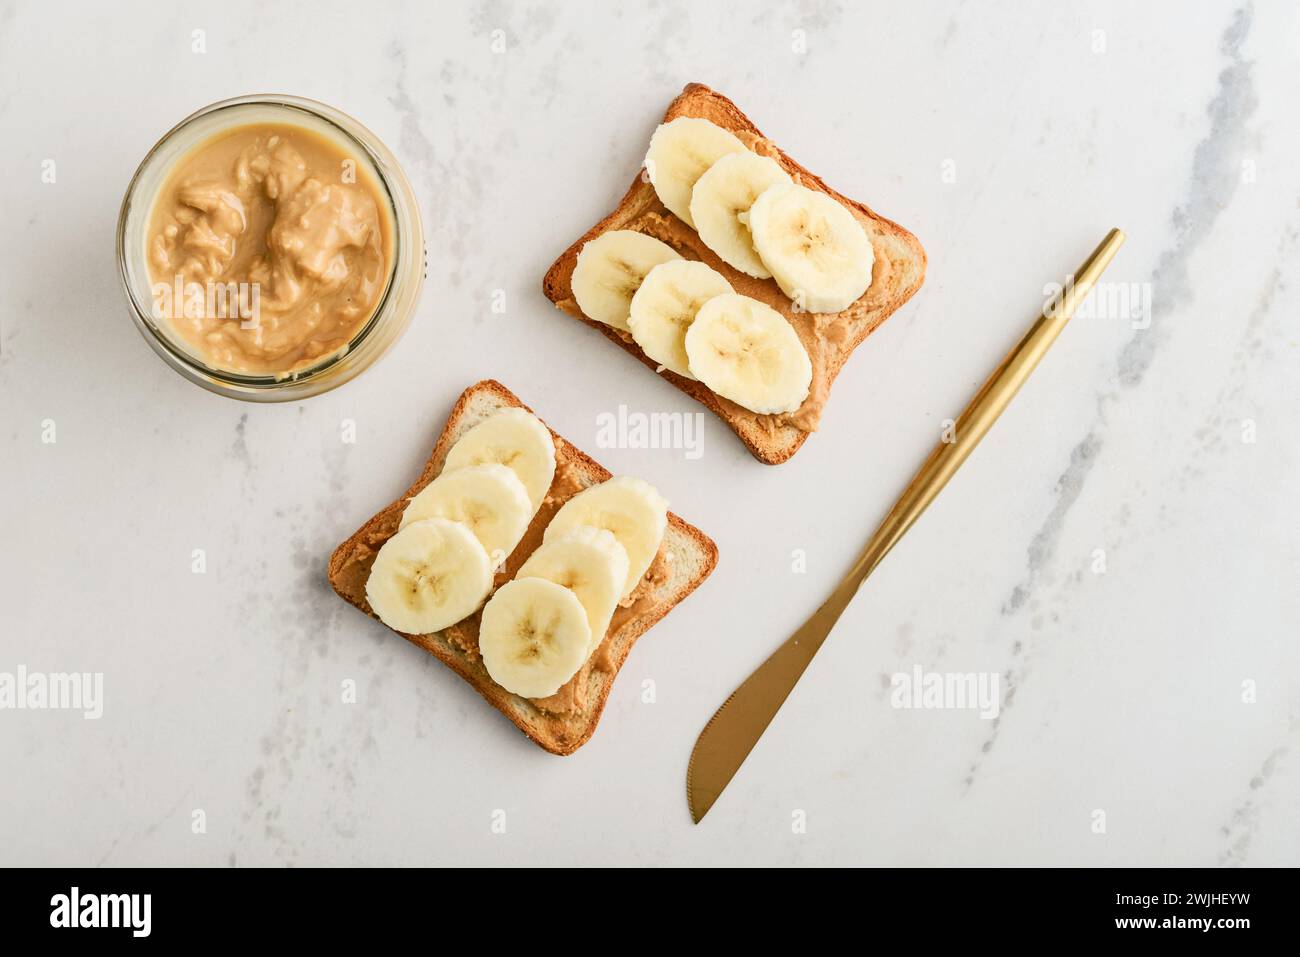 Peanut butter sandwich with fresh banana slices on marble table, top view Stock Photo